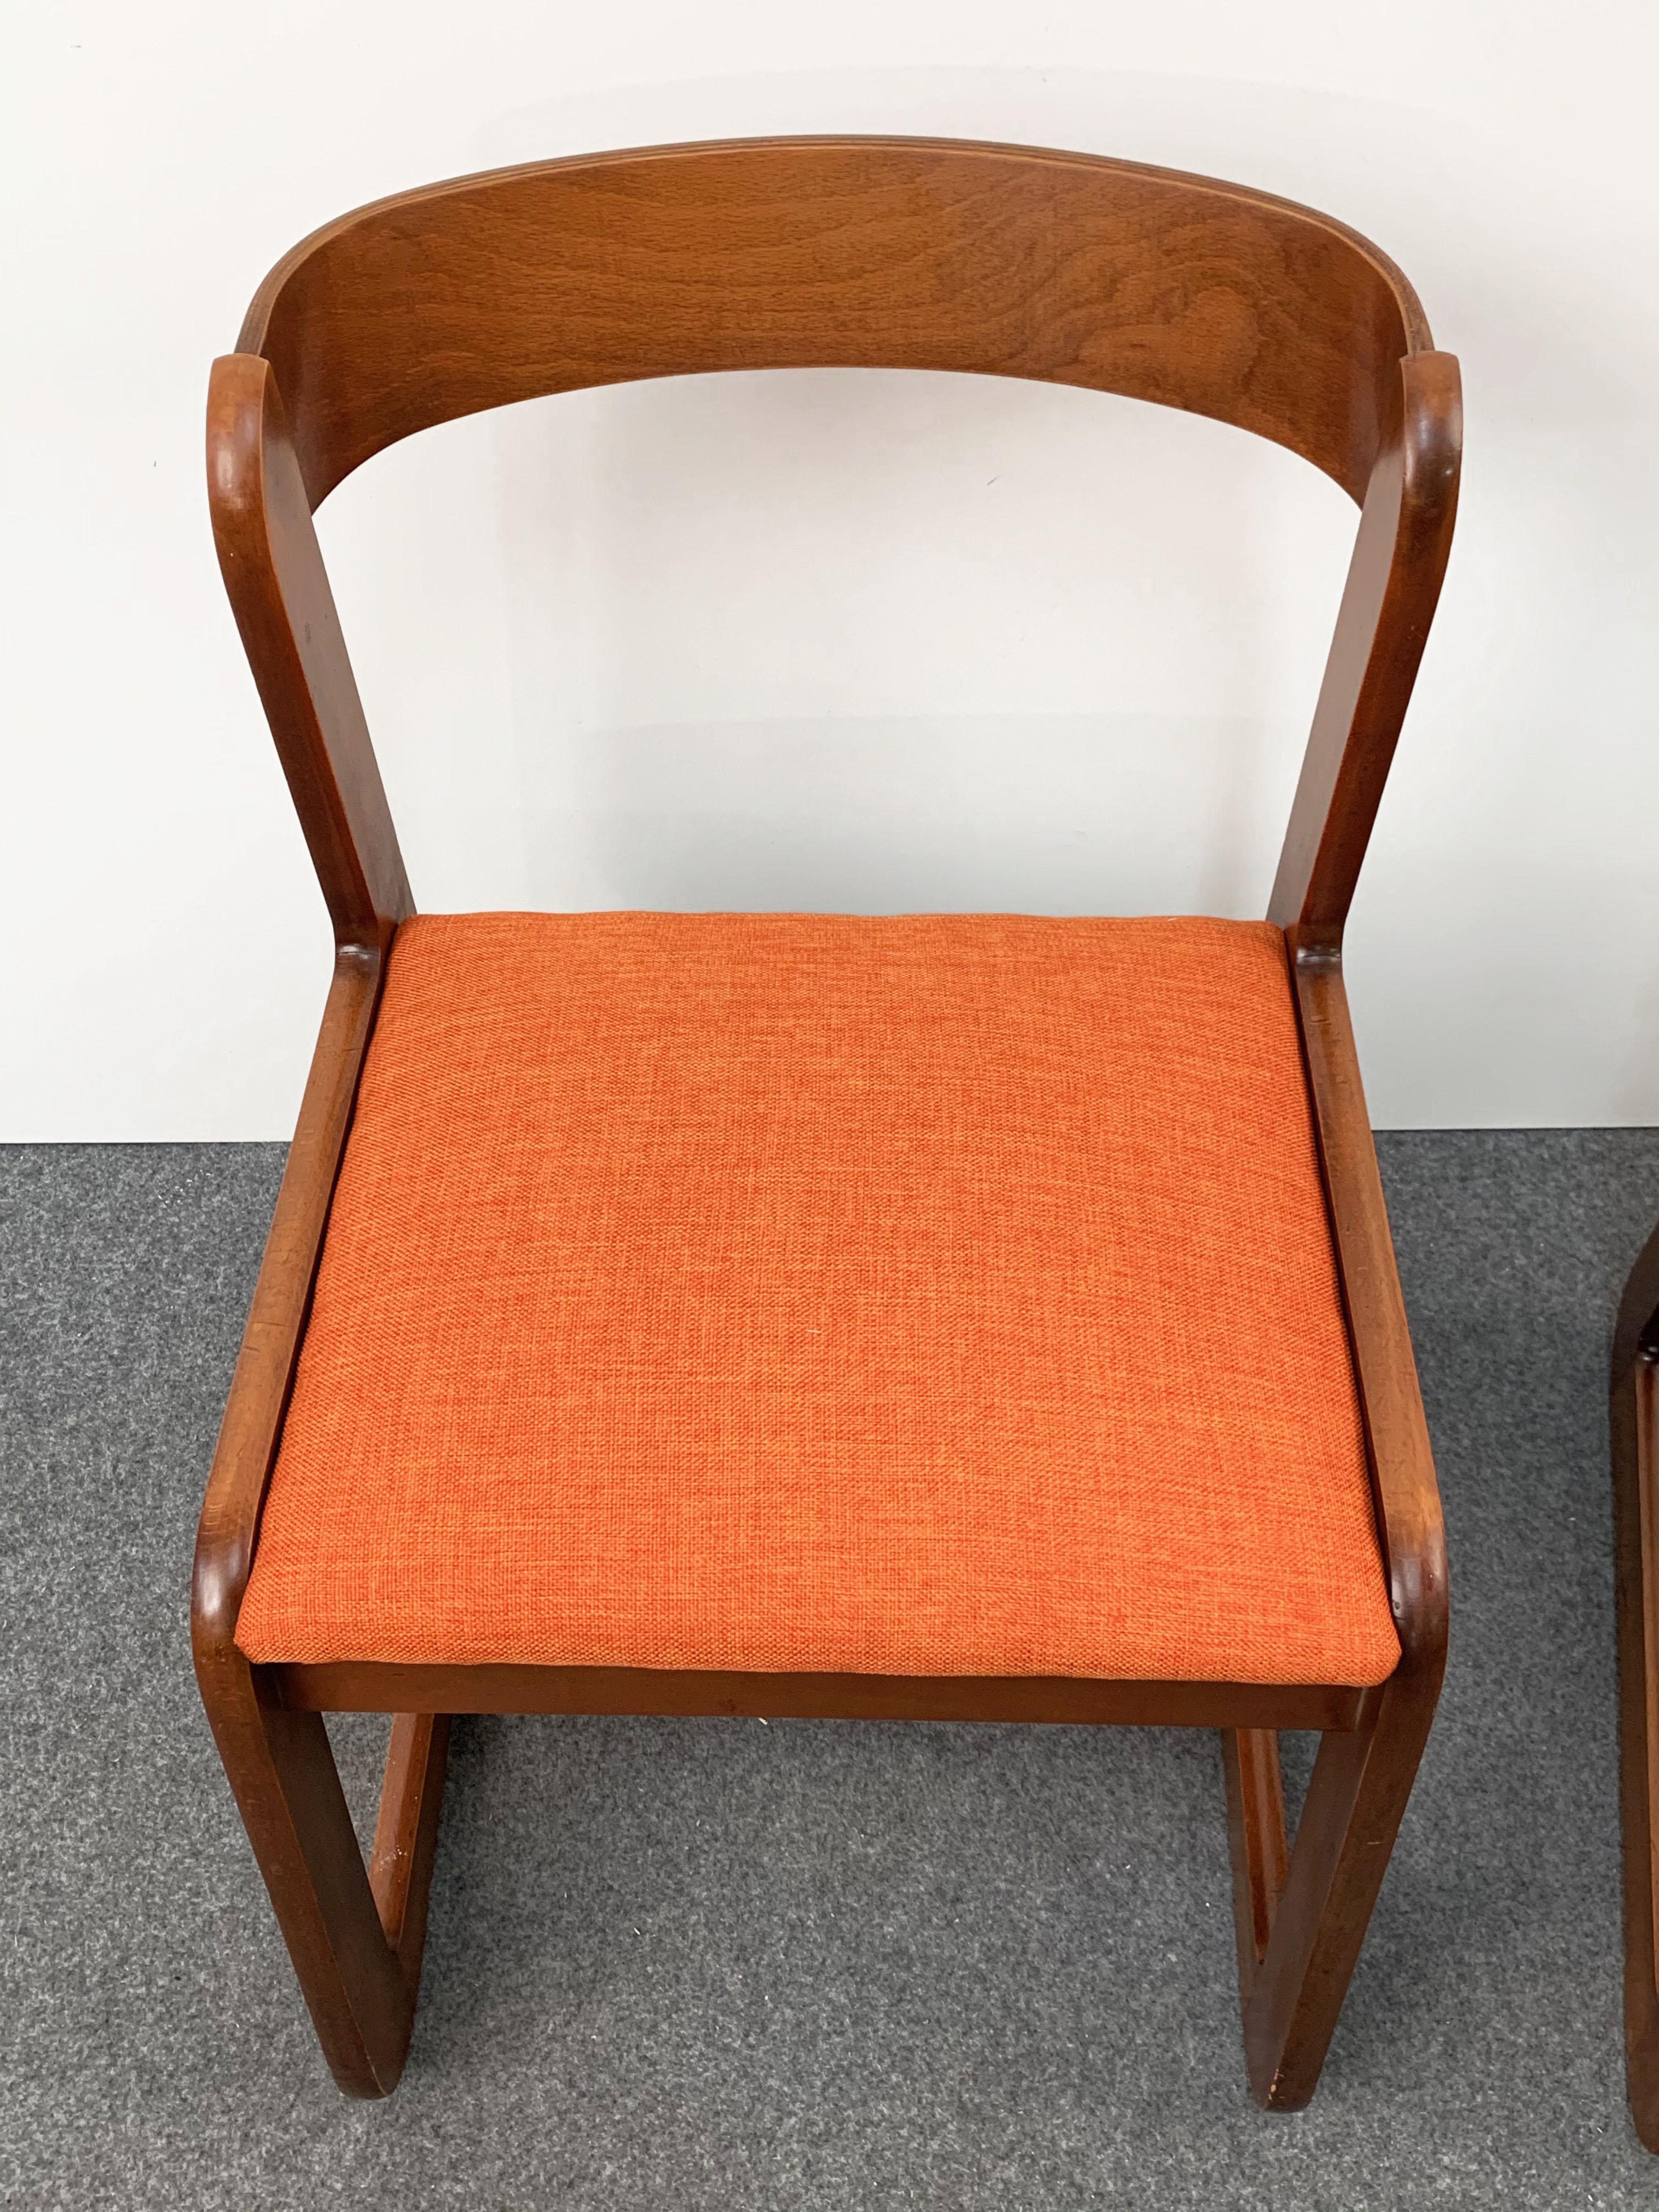 Willy Rizzo Midcentury Italian Wooden and Orange Fabric Chairs, Mario Sabot 1970 8